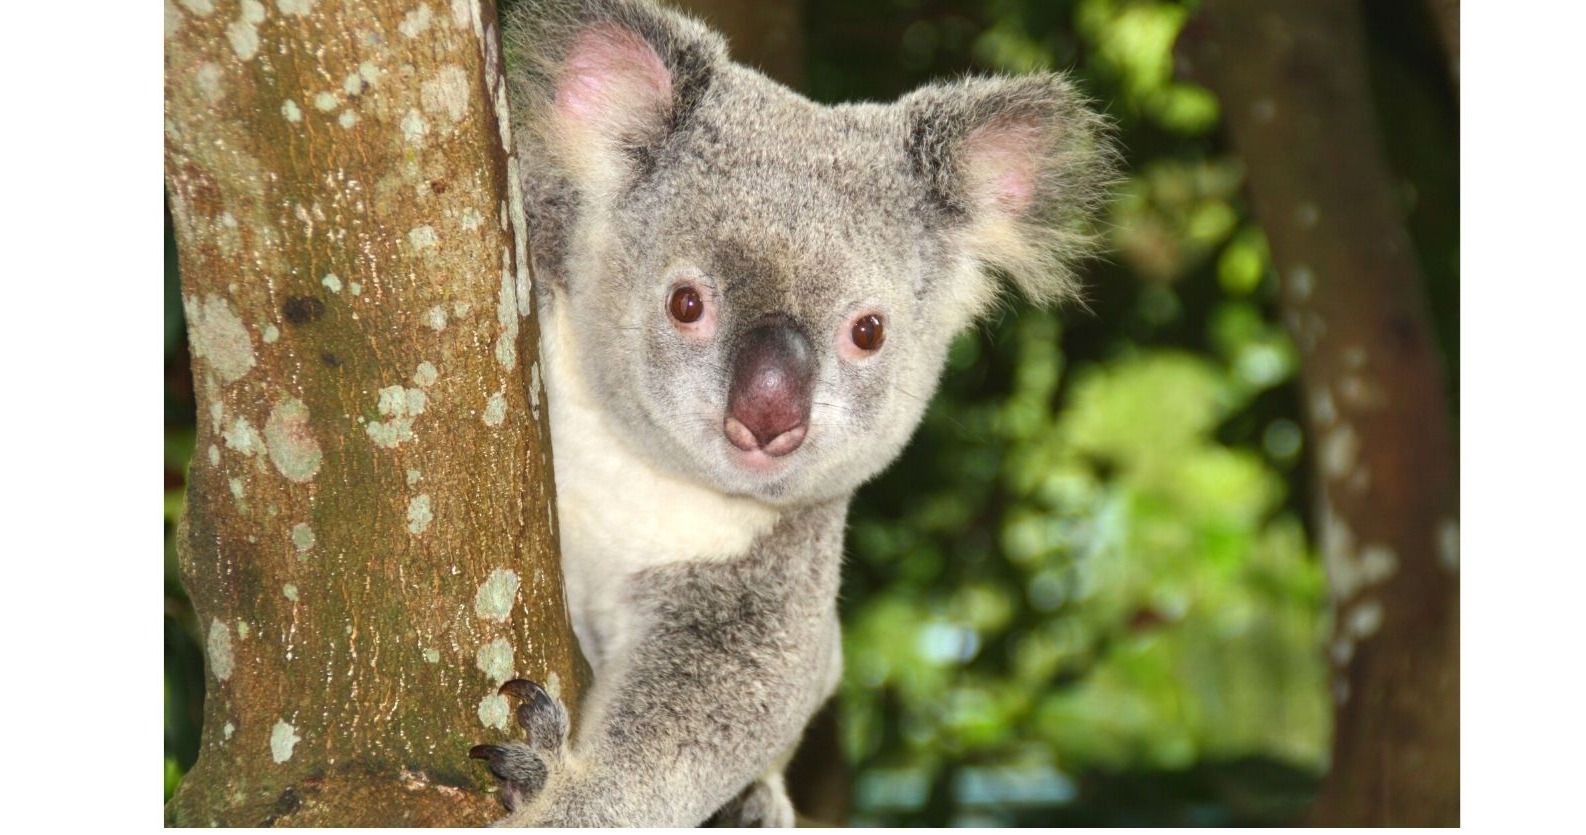 Animals From Australia: Let's Learn About Kangaroos, Koalas, and Wombats! |  Small Online Class for Ages 5-9